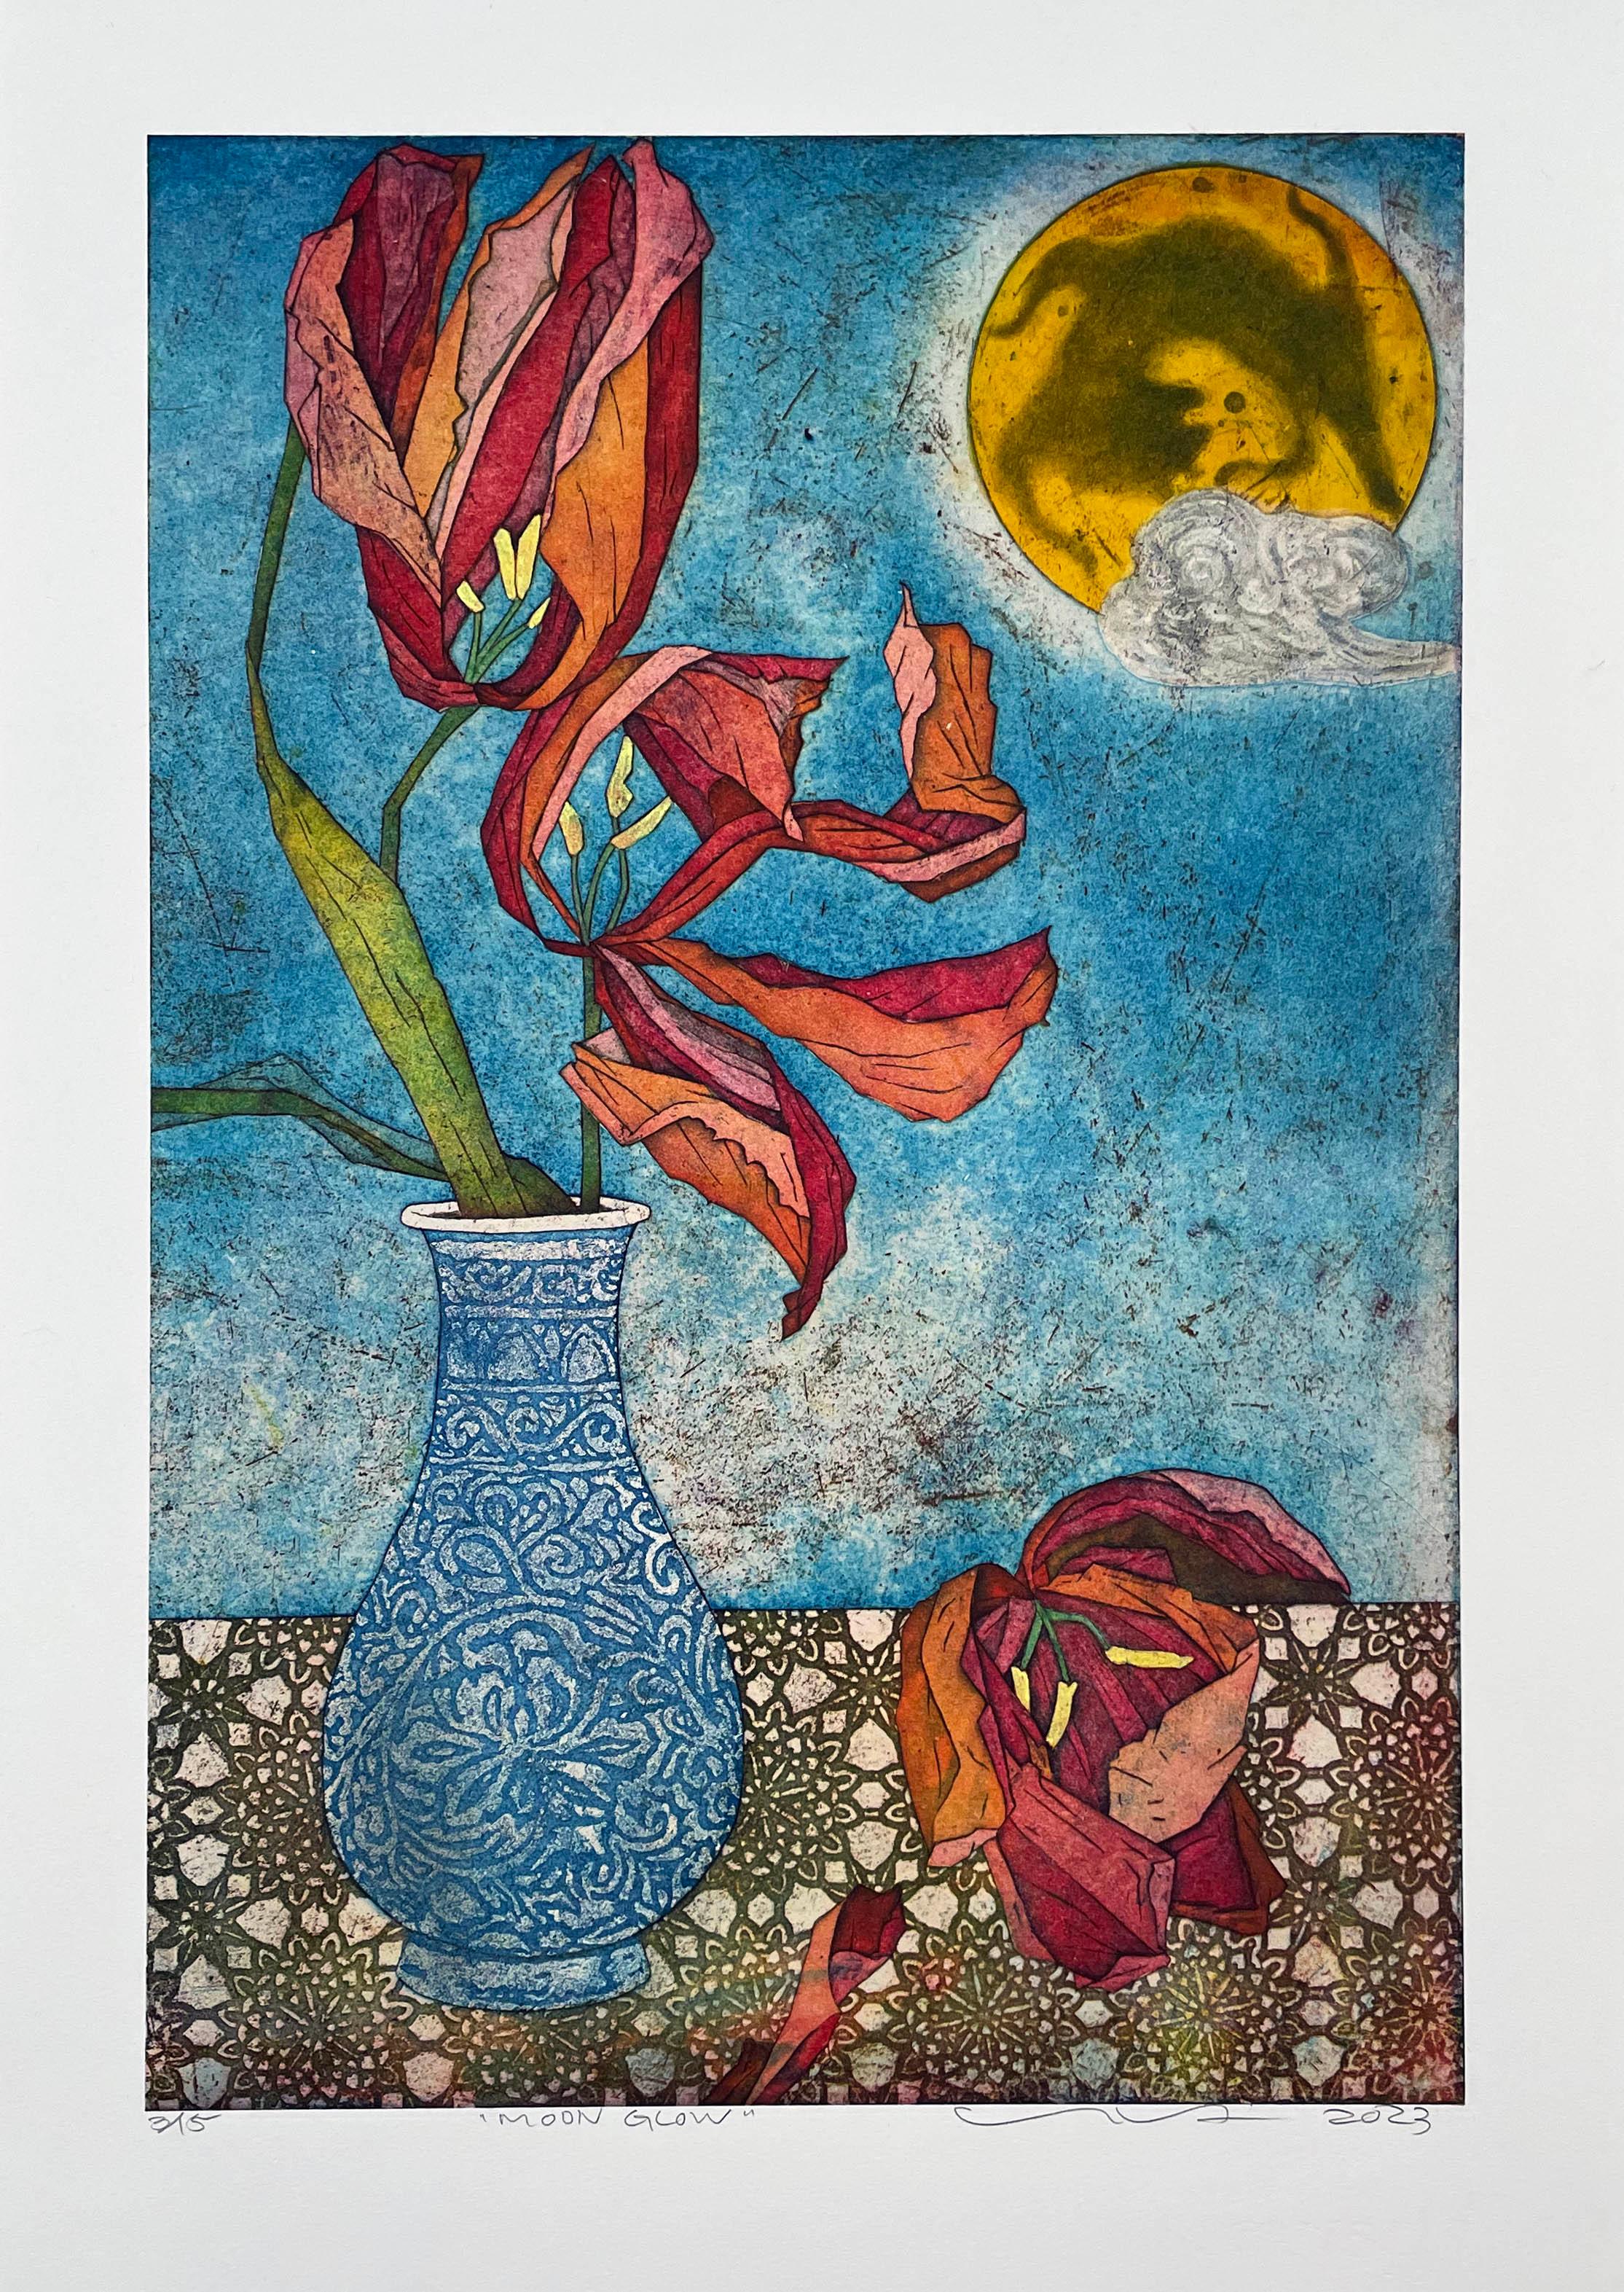 Signed, titled, and numbered from the edition of 15. Japanese still life with vase and flowers on a table, with a large glowing orange moon in the background. While the images have some resemblance to traditional Japanese Ukiyo-e prints, their sense